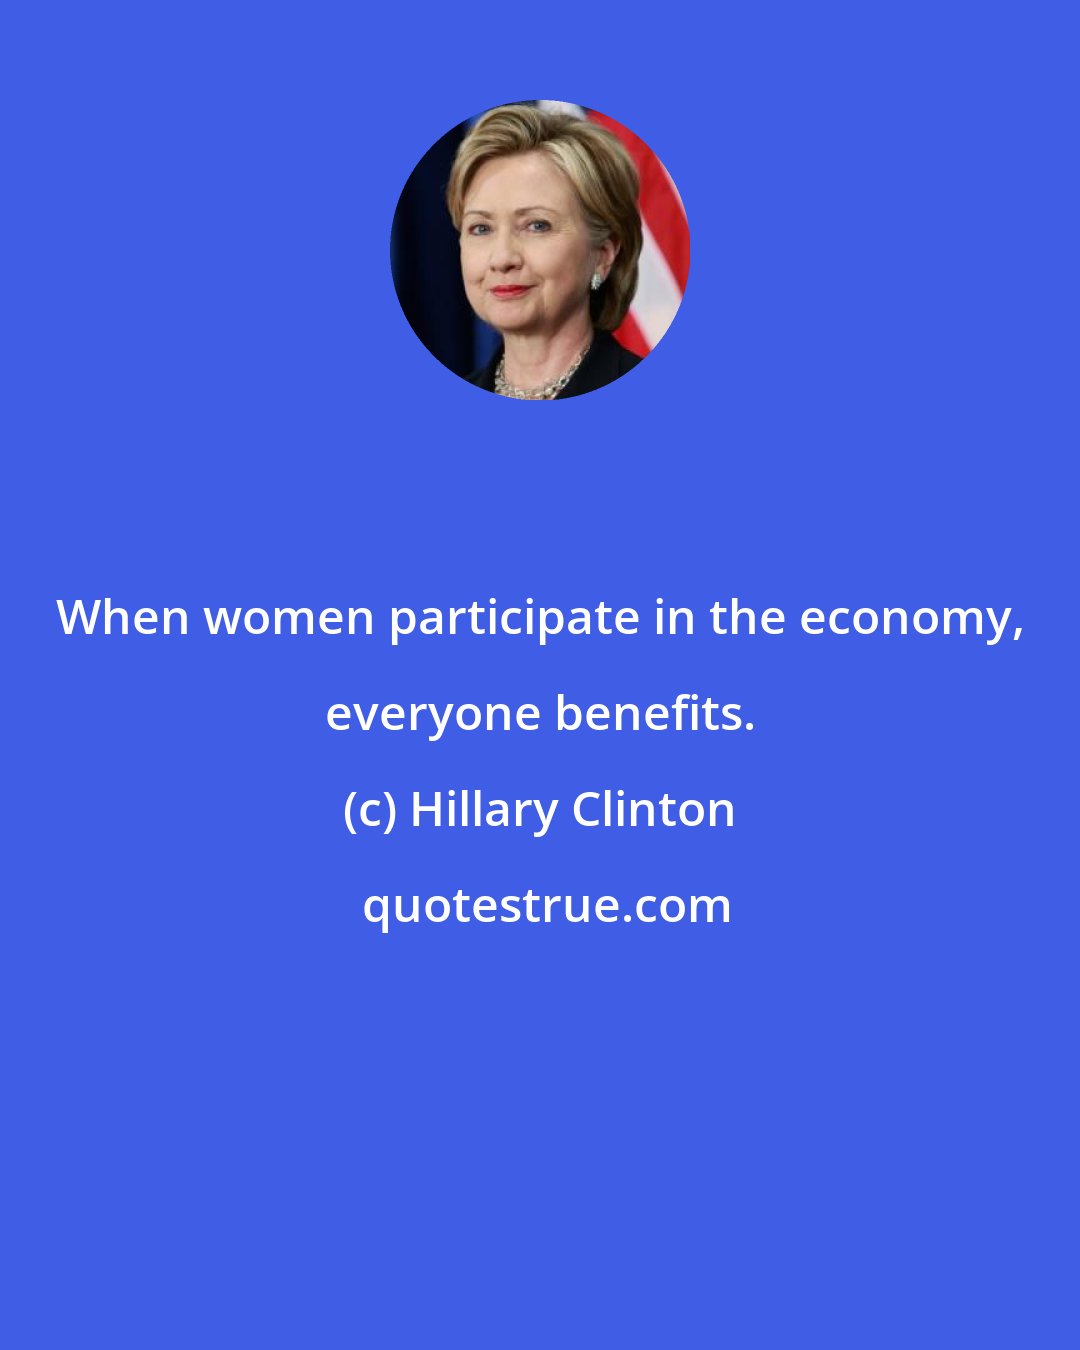 Hillary Clinton: When women participate in the economy, everyone benefits.